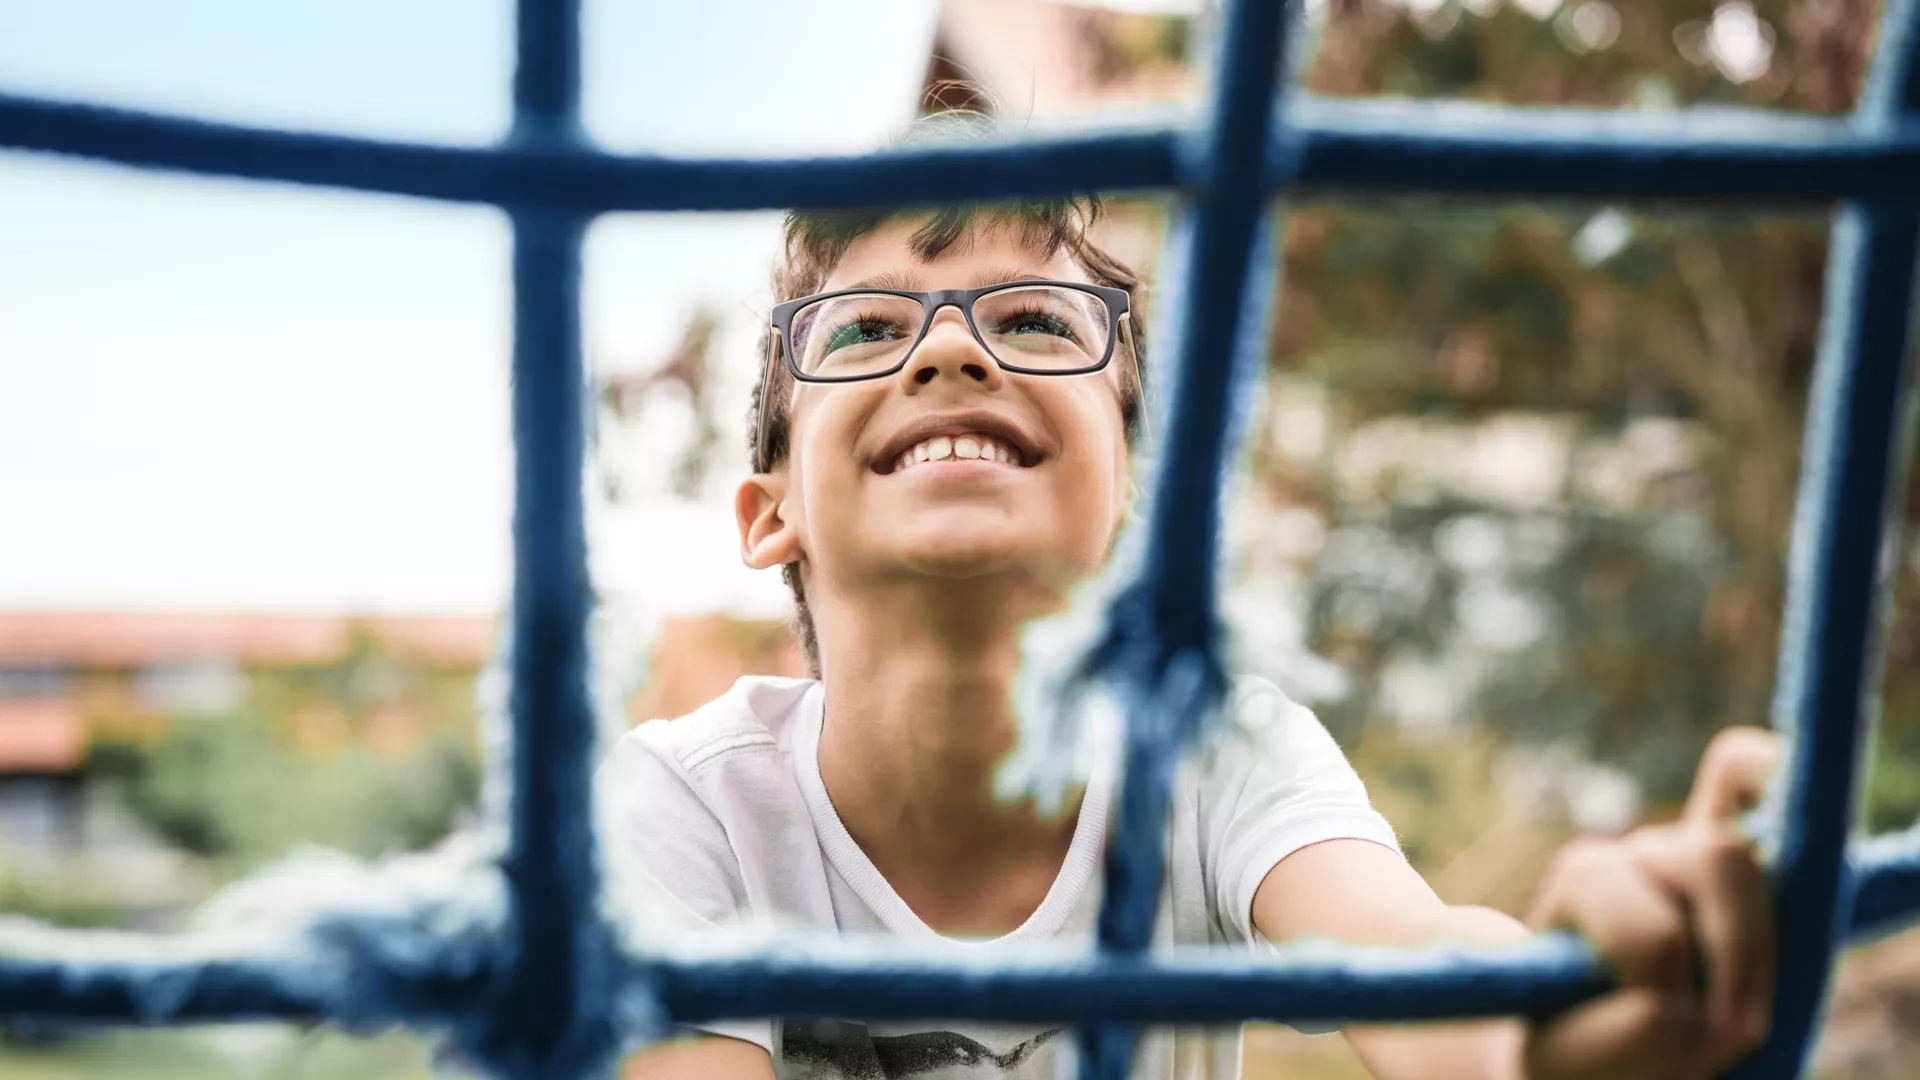 A smiling young boy in glasses looking upward and holding onto a blue net structure, with a blurred background suggesting an outdoor setting.